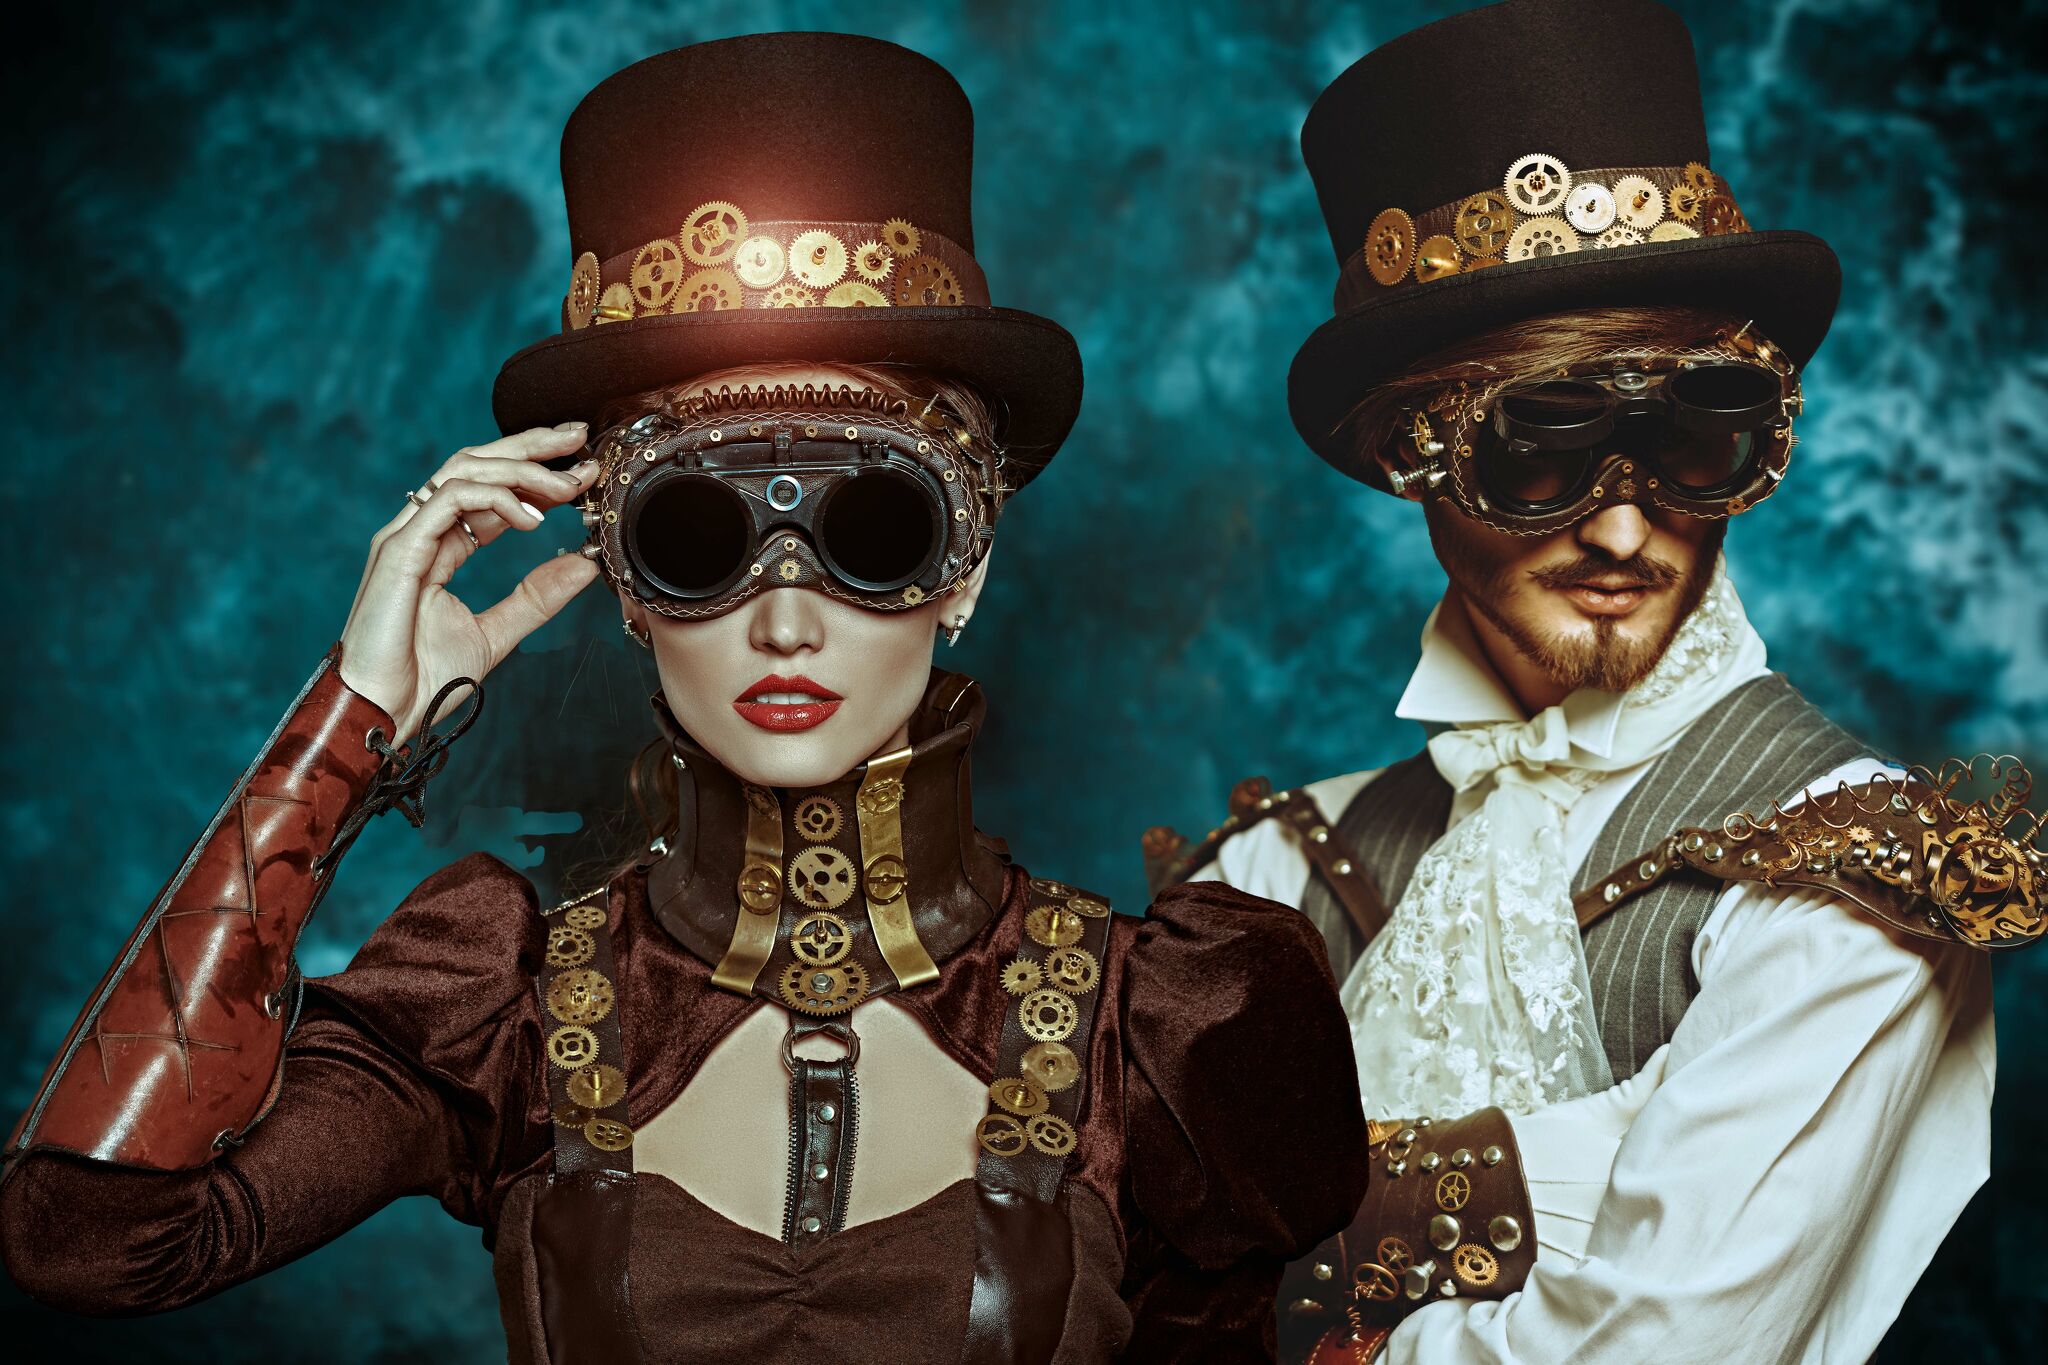 How to cosplay as a steampunk character